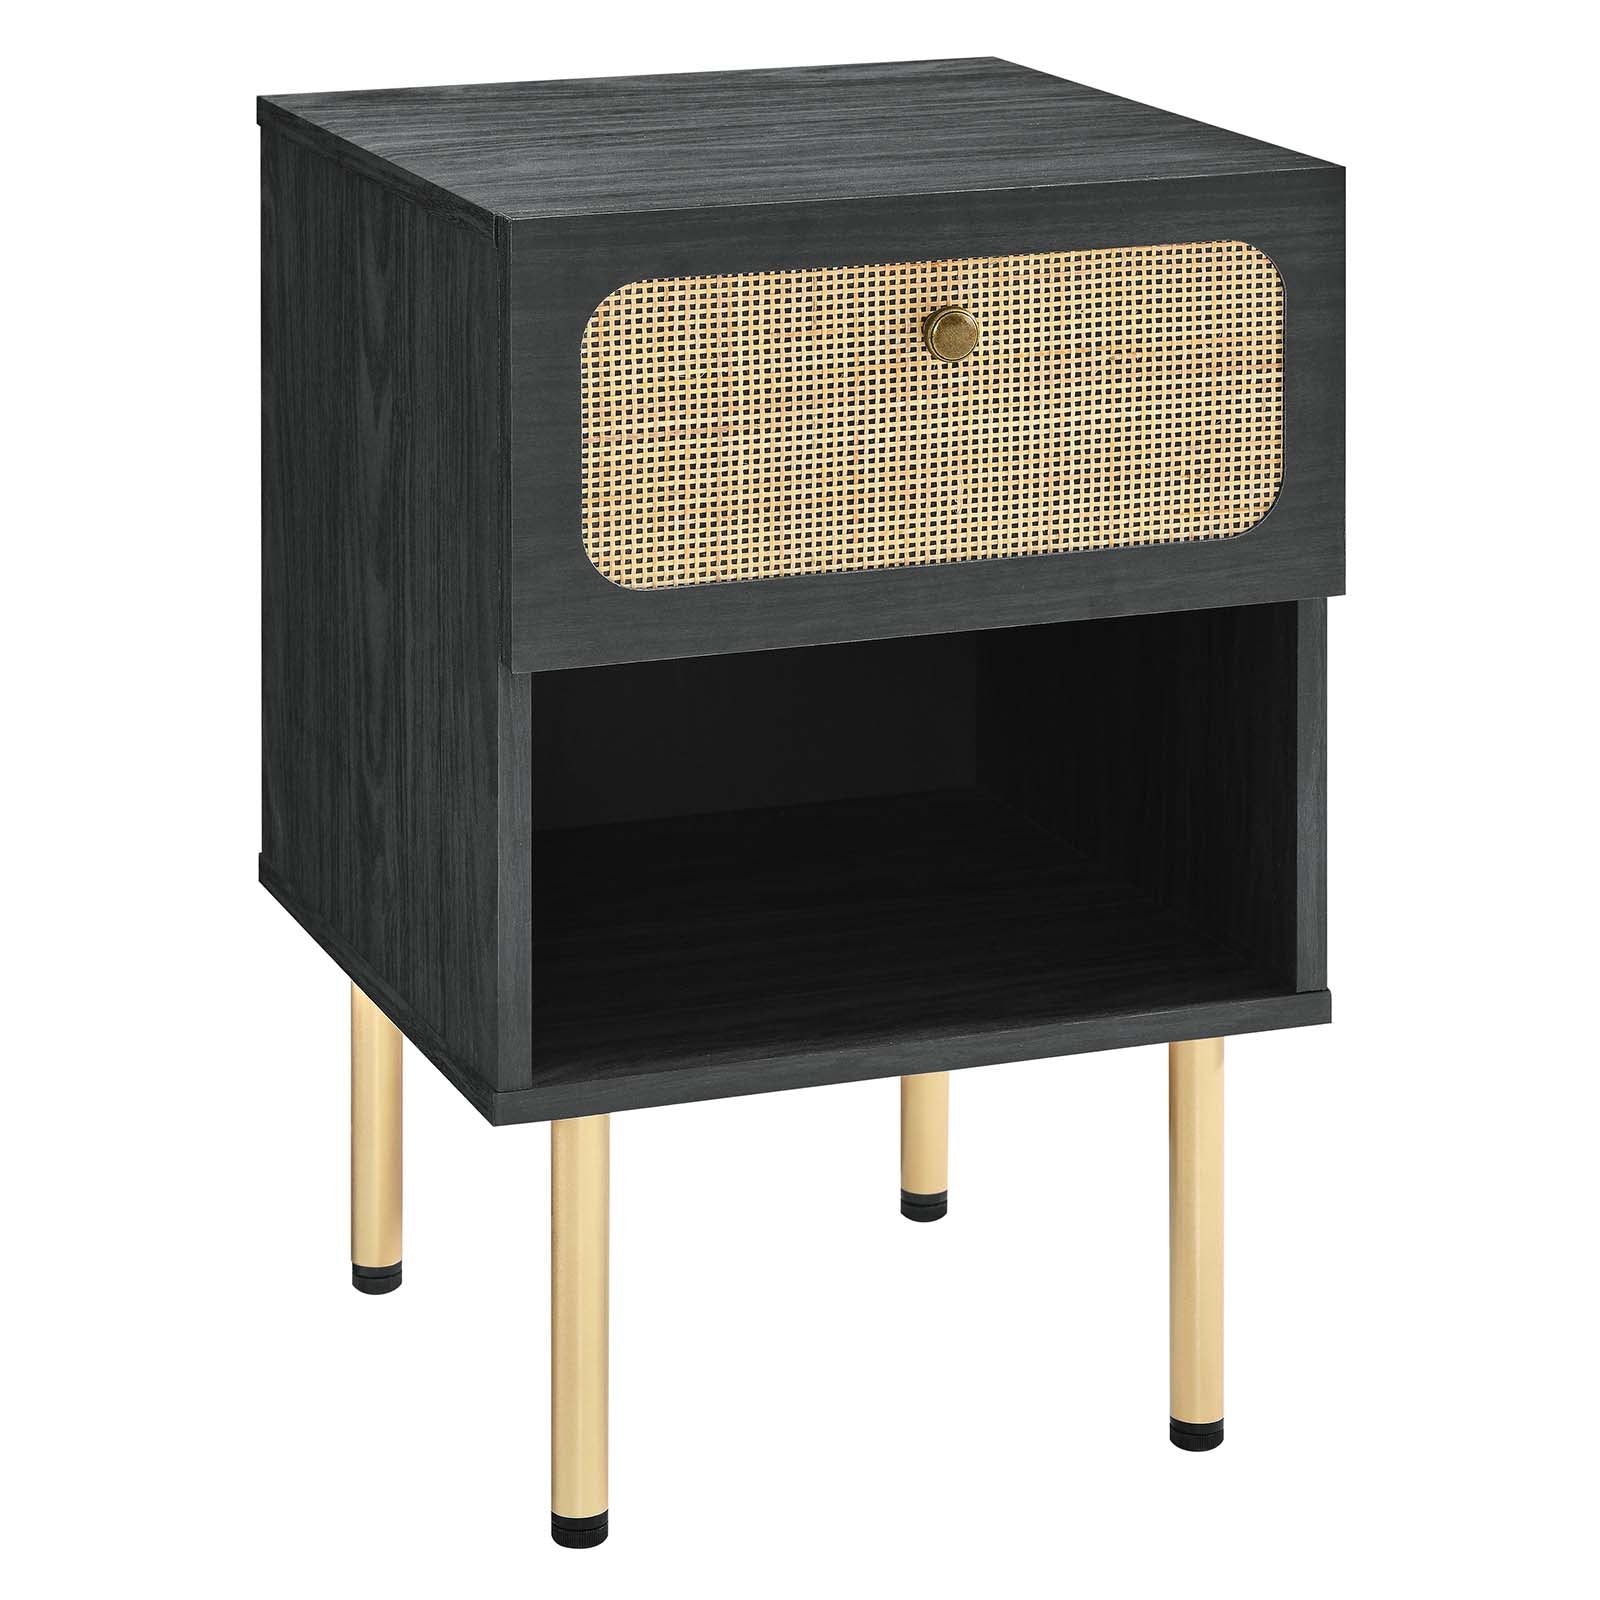 Modway Nightstands & Side Tables - Chaucer-Nightstand-Black